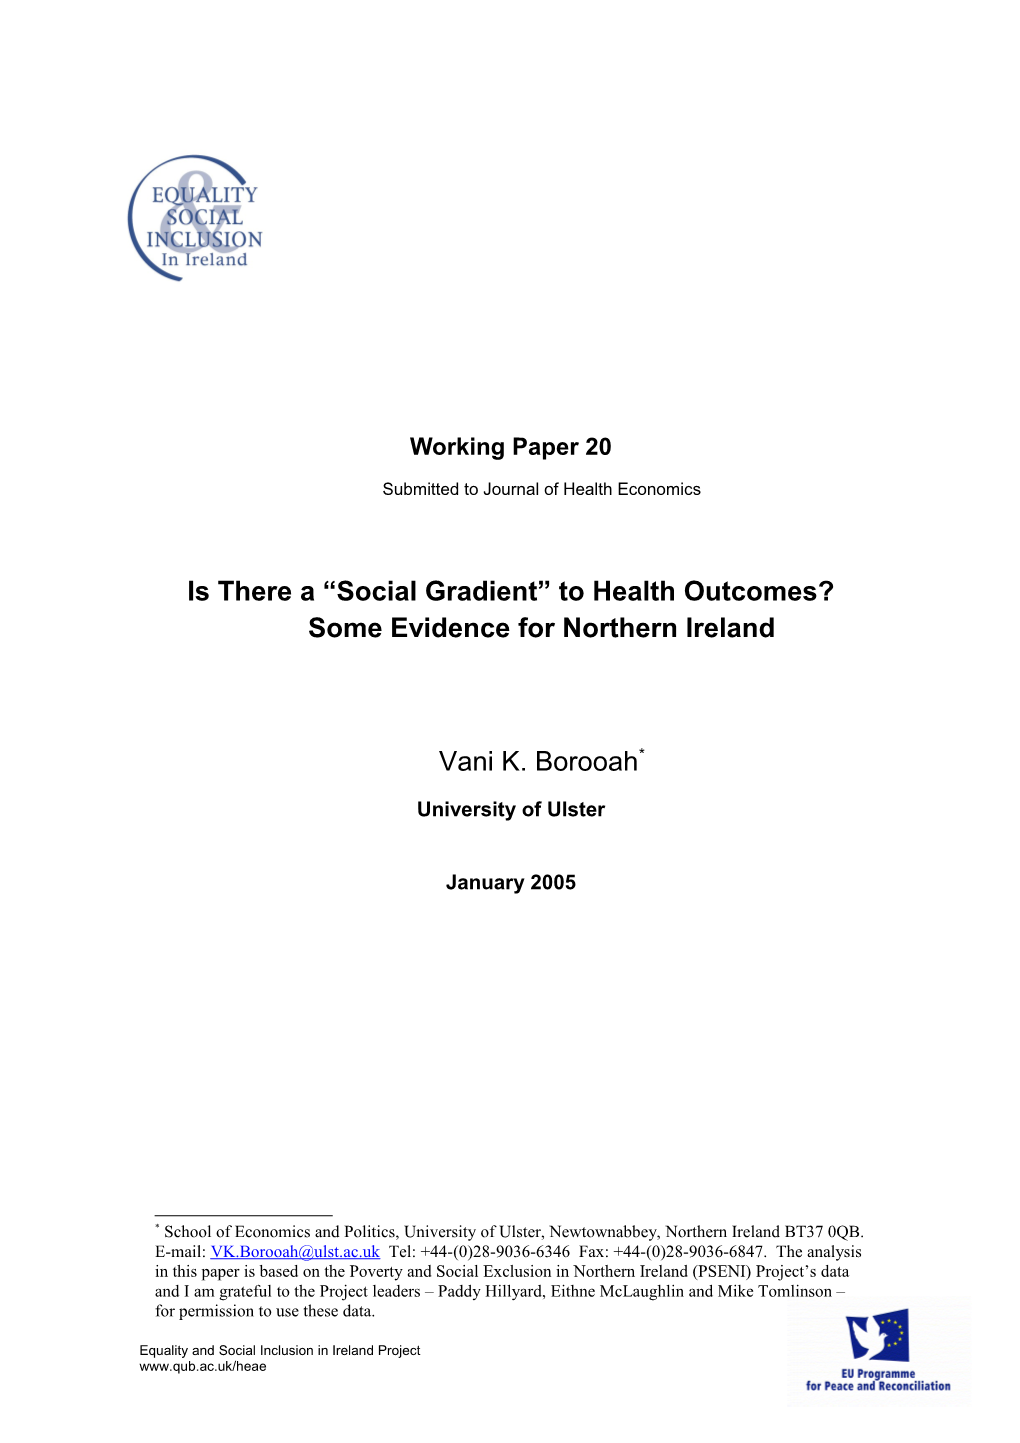 Is There a Social Gradient to Health Outcomes?